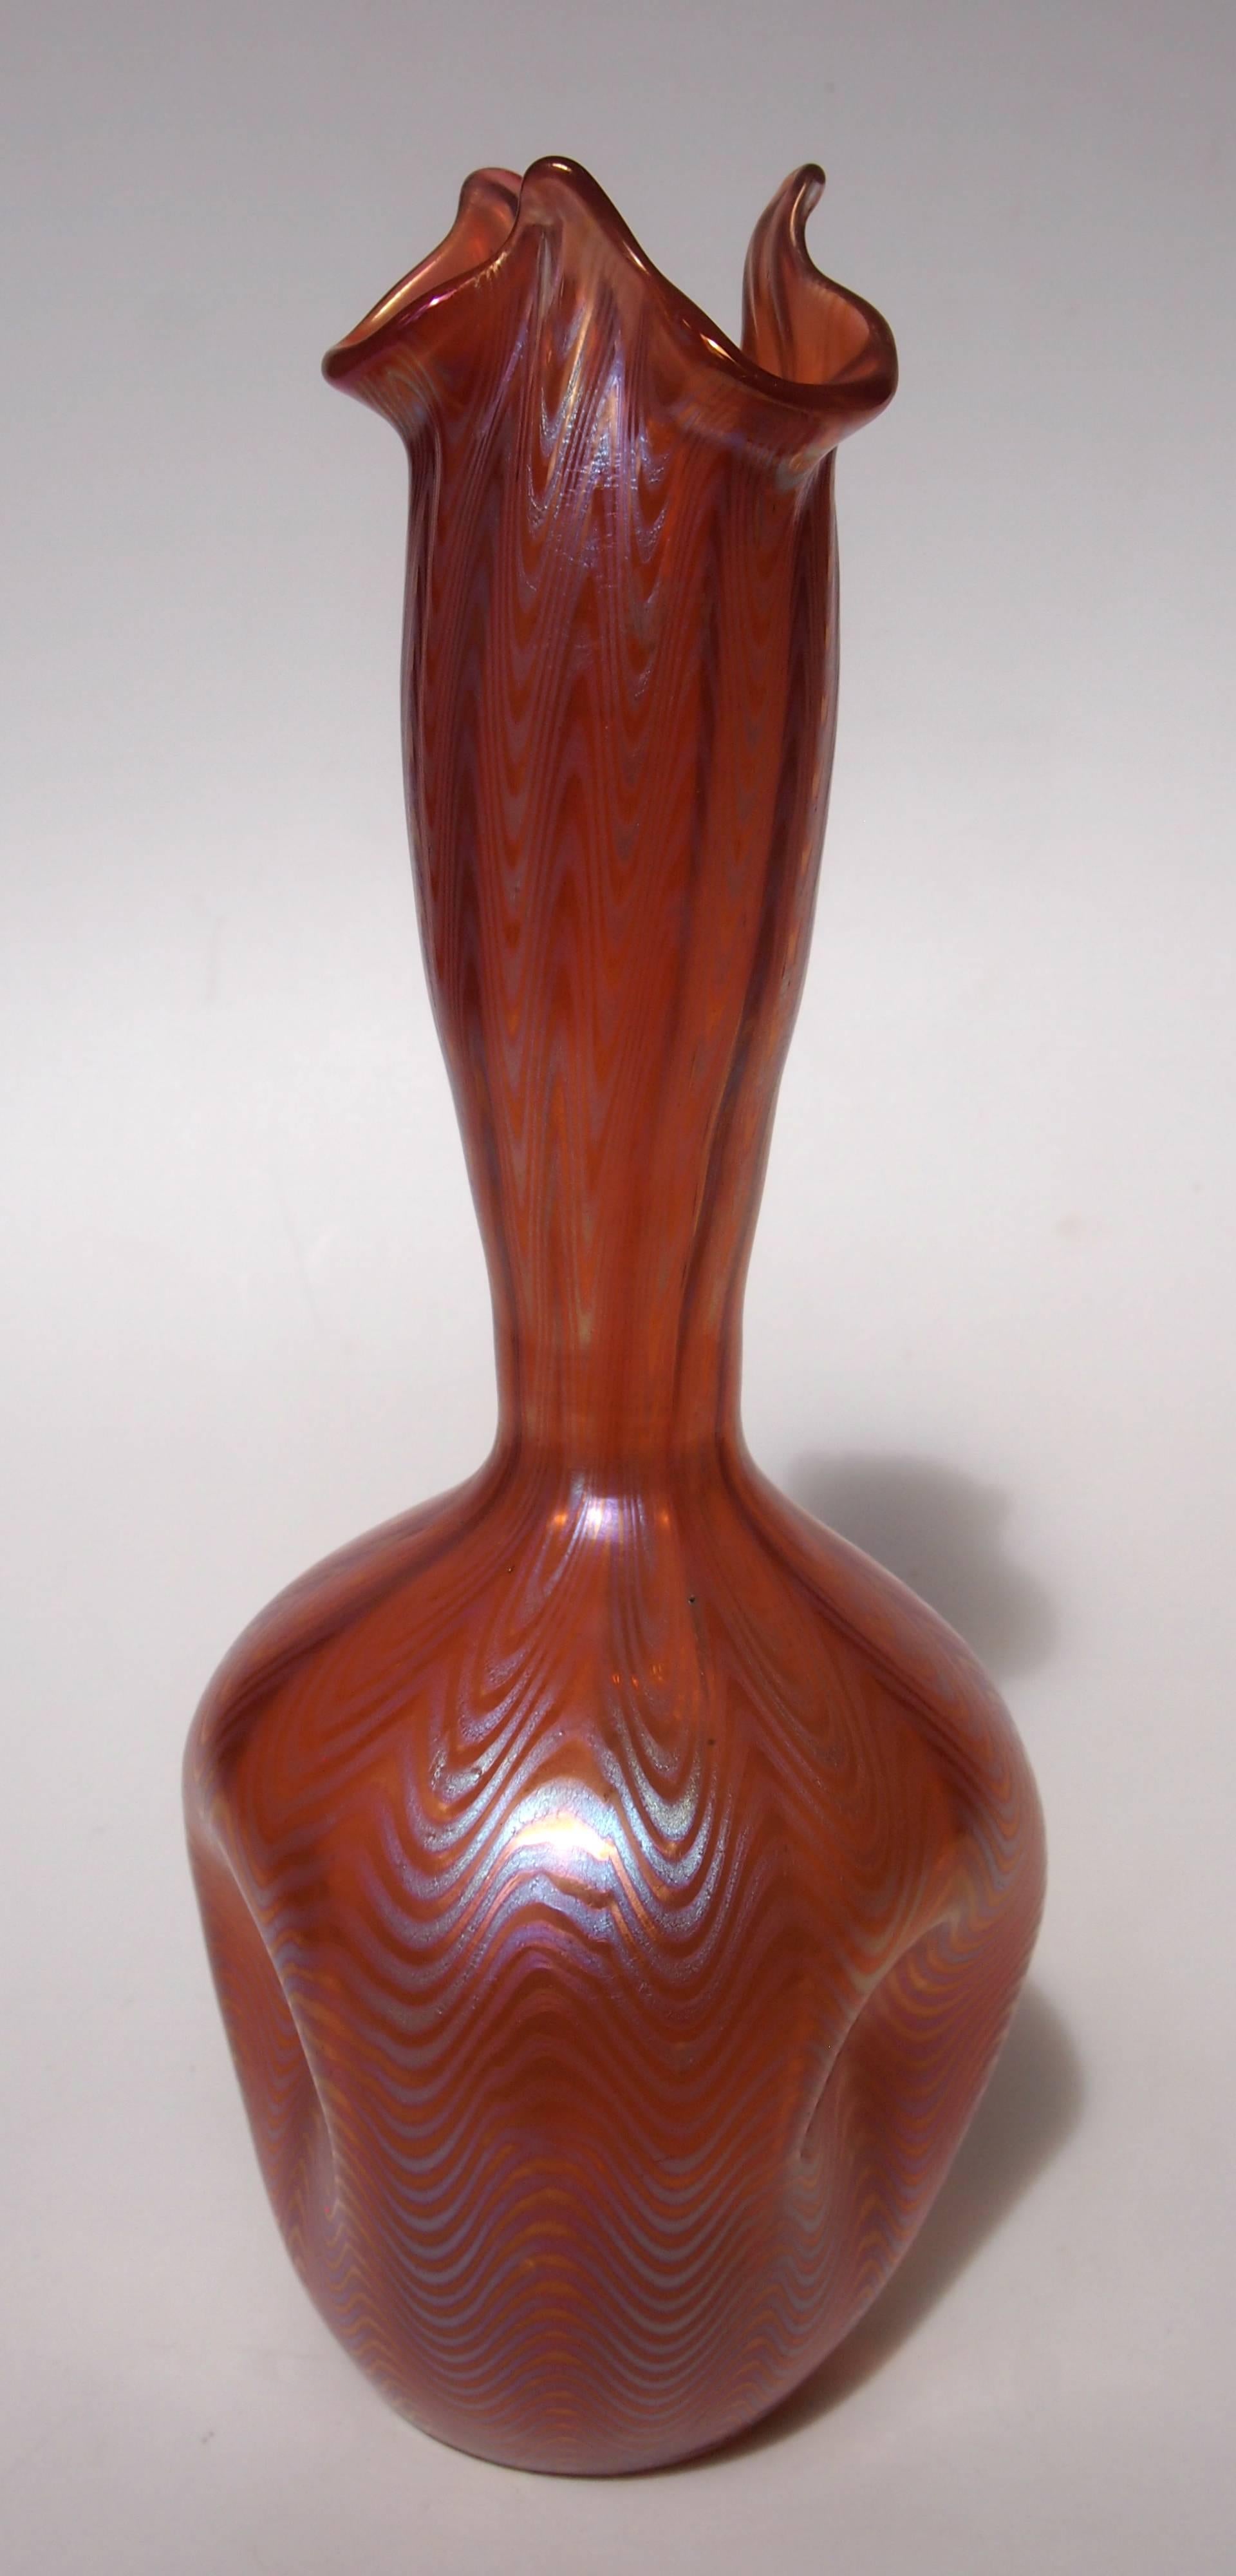 Stunning pulled and shaped Loetz Phaenomen vase in the Classic 6893 pattern but in the very rare orange finish

Loetz was probably the finest European iridised glass maker of the Art Nouveau period and is highly collected world-wide. The Loetz